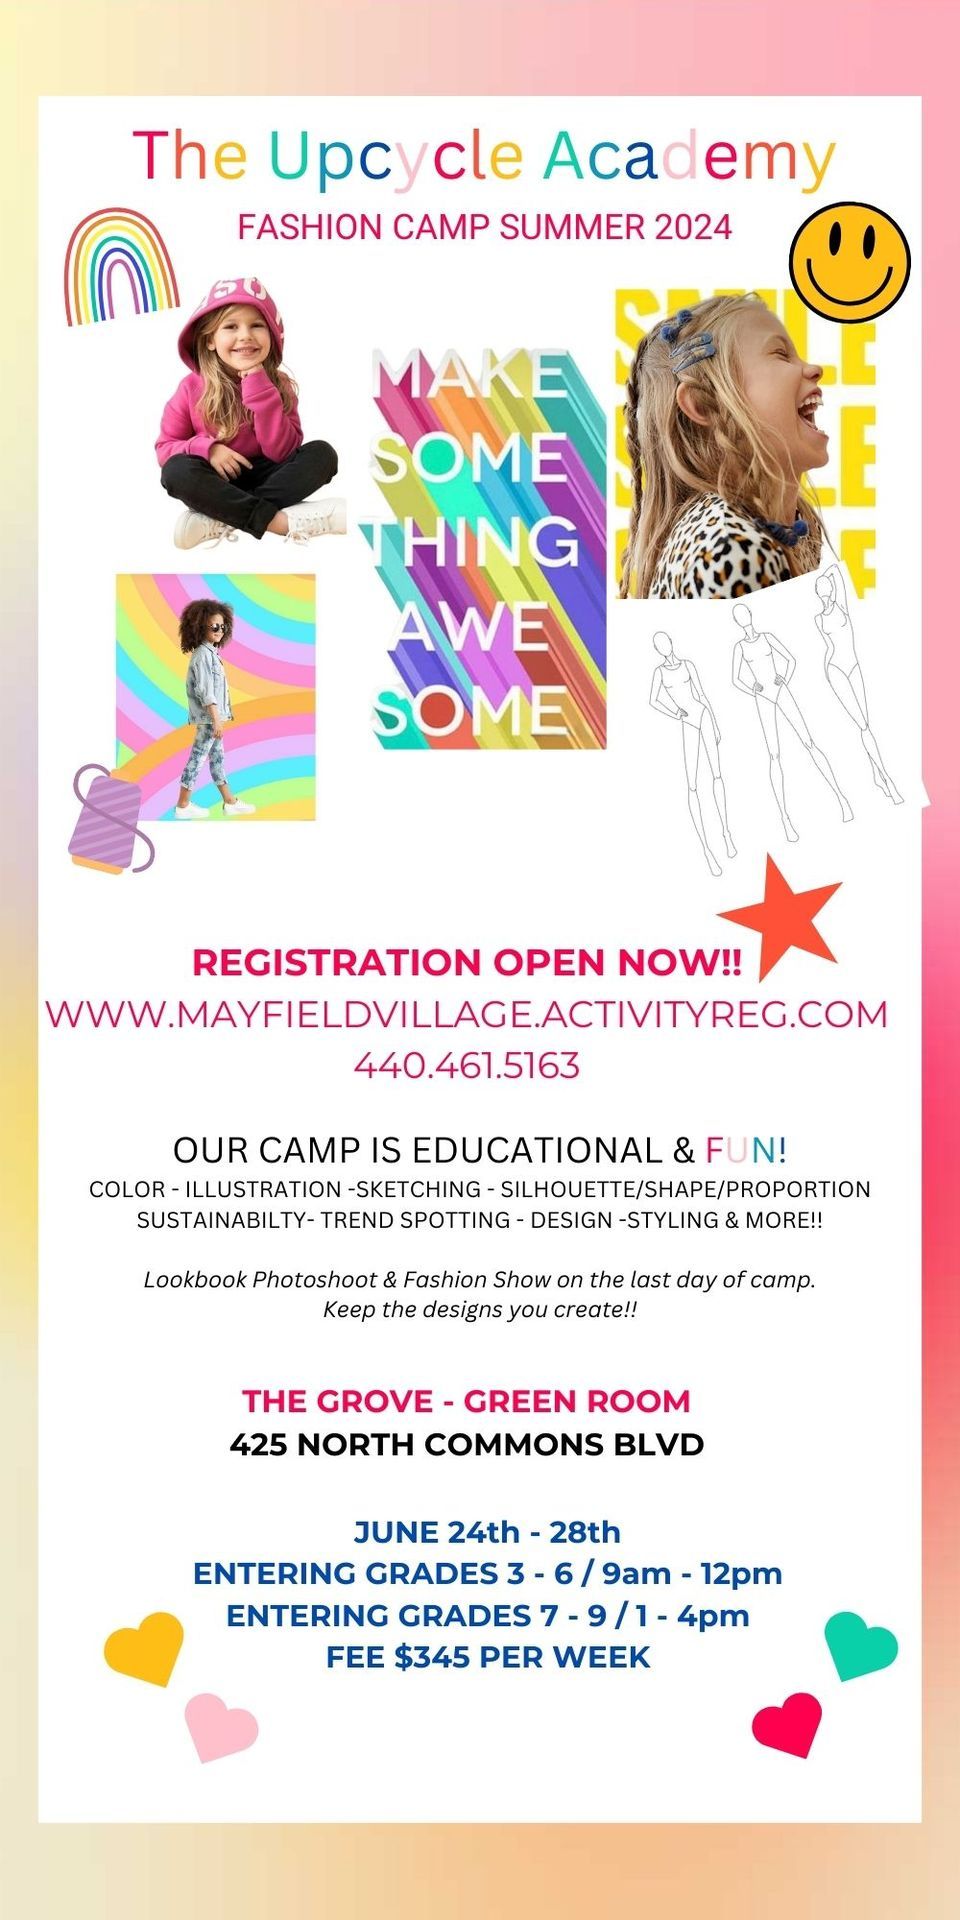 THE UPCYCLE ACADEMY: FASHION CAMP